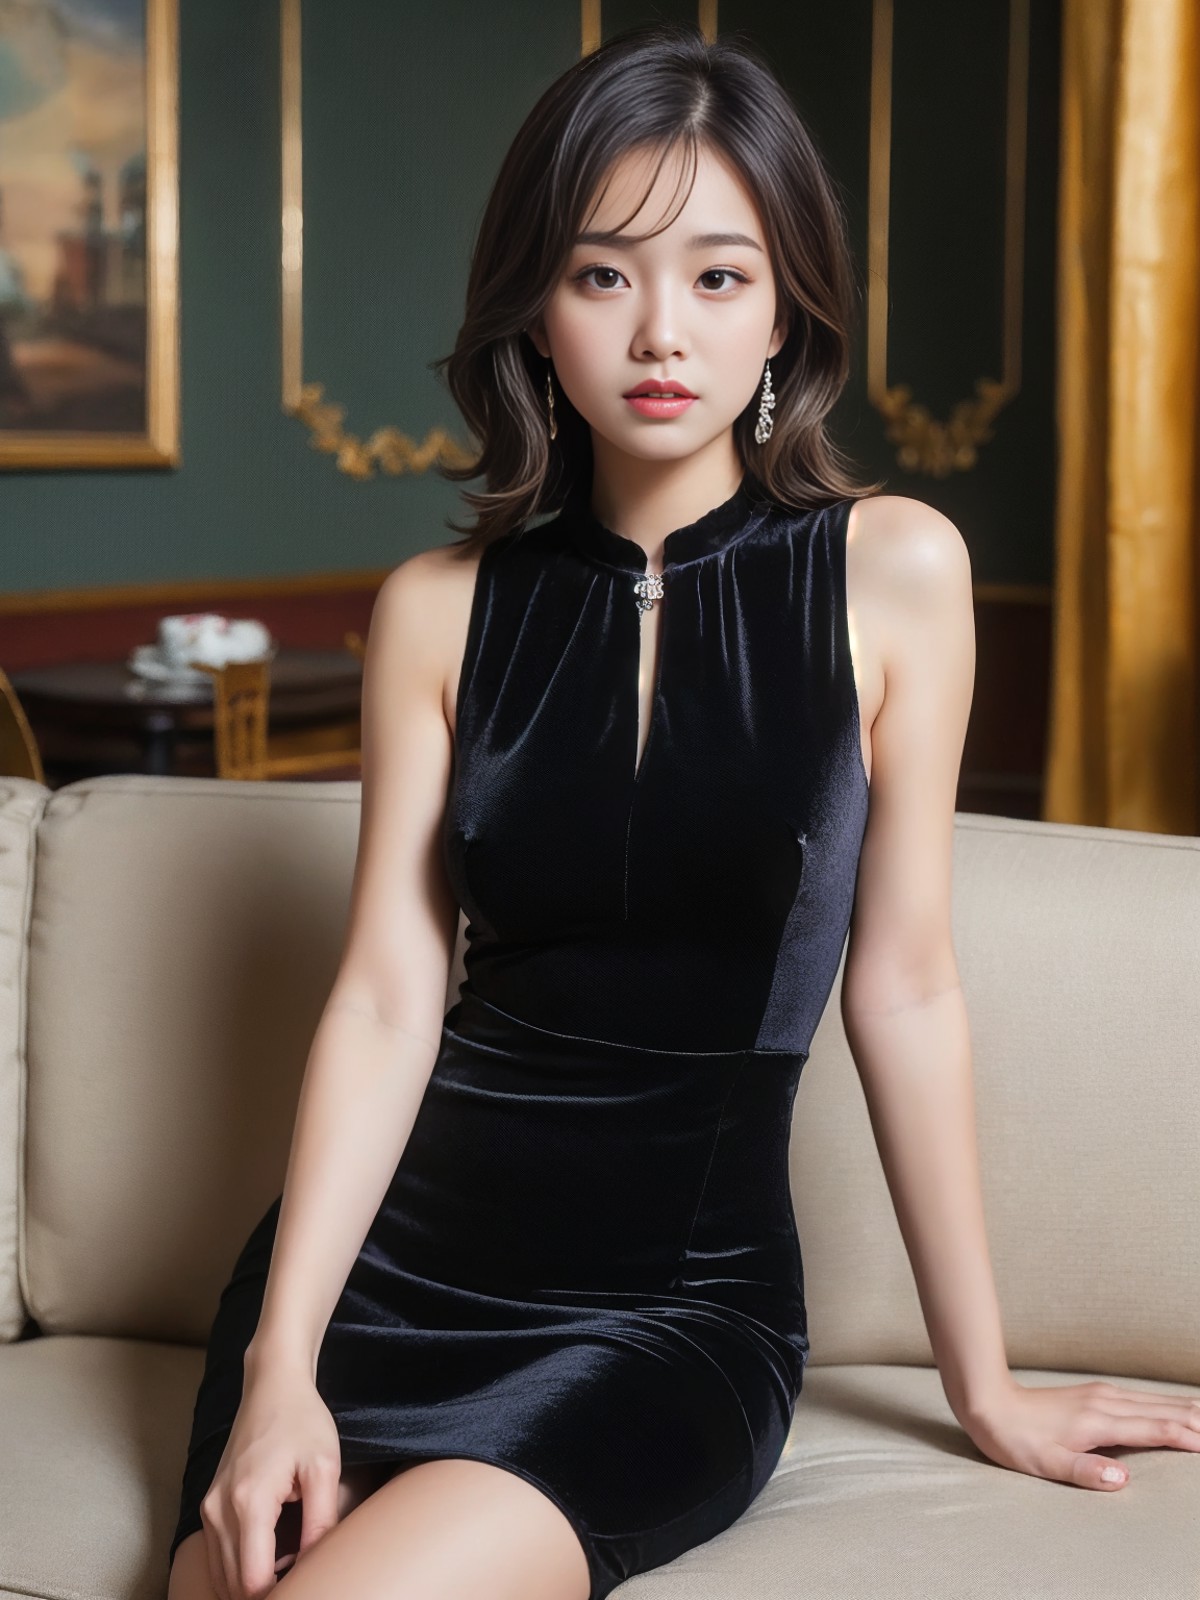 the girl is wearing a (black:1.2) velvet dress sitting on the sofa in art deco room, best quality, masterpiece, official a...